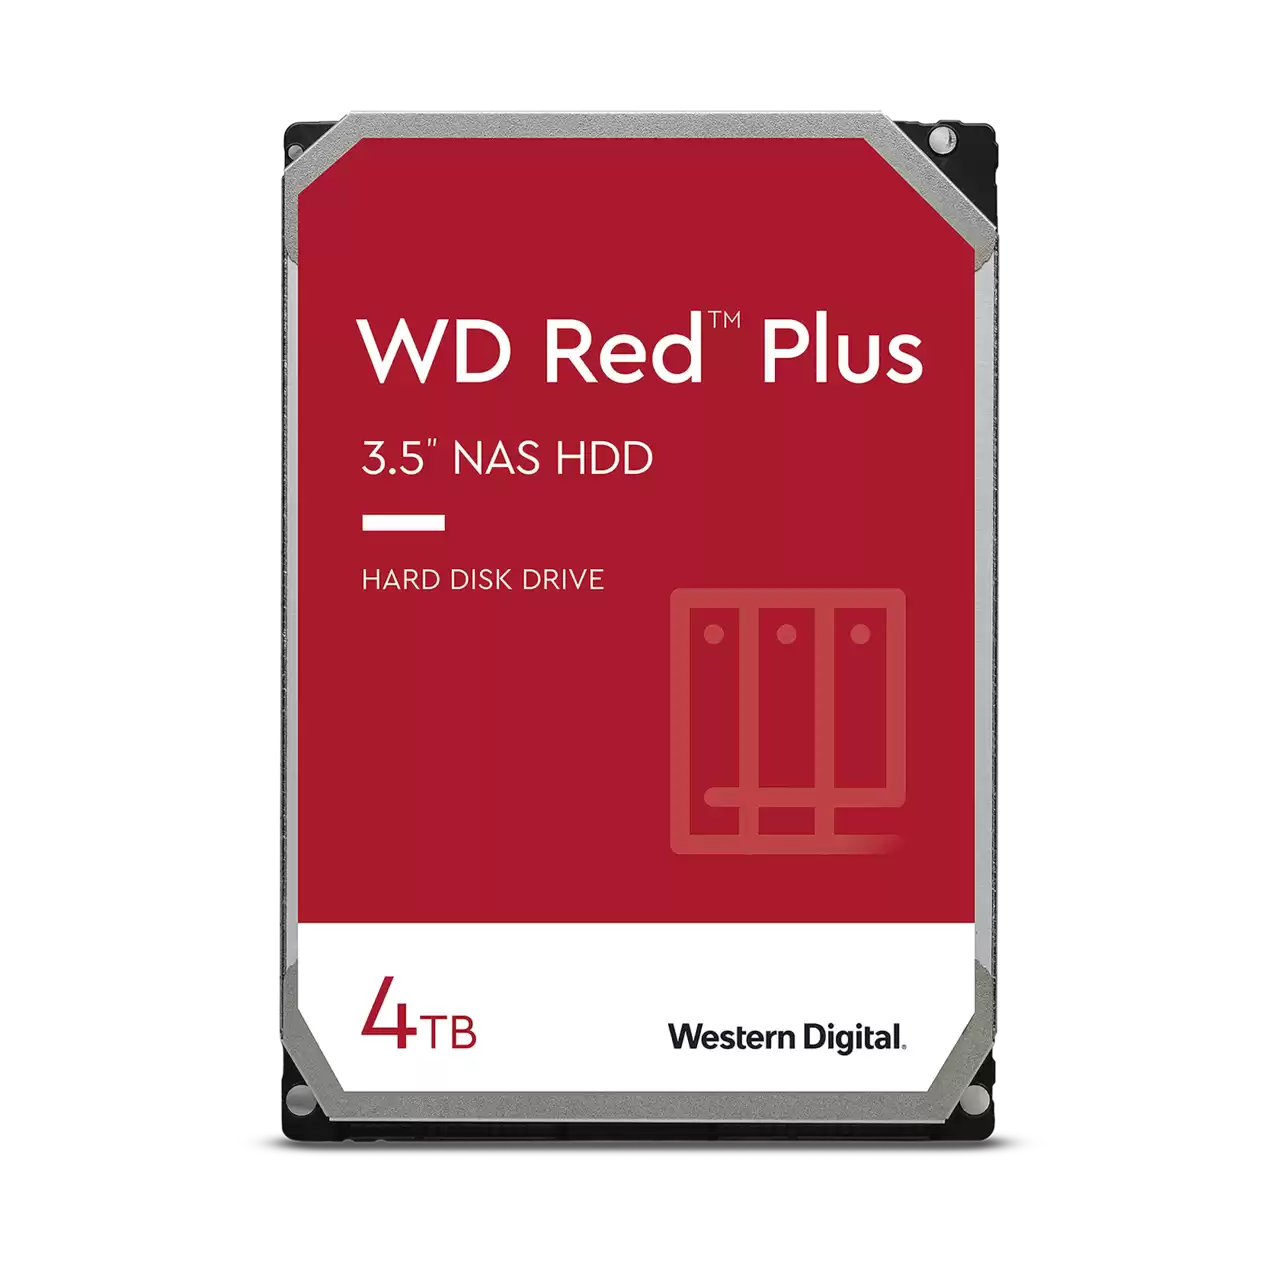 WD Red WD40EFPX  Plus CMR 4TB SATA 3.5 128 MB Cache HDD